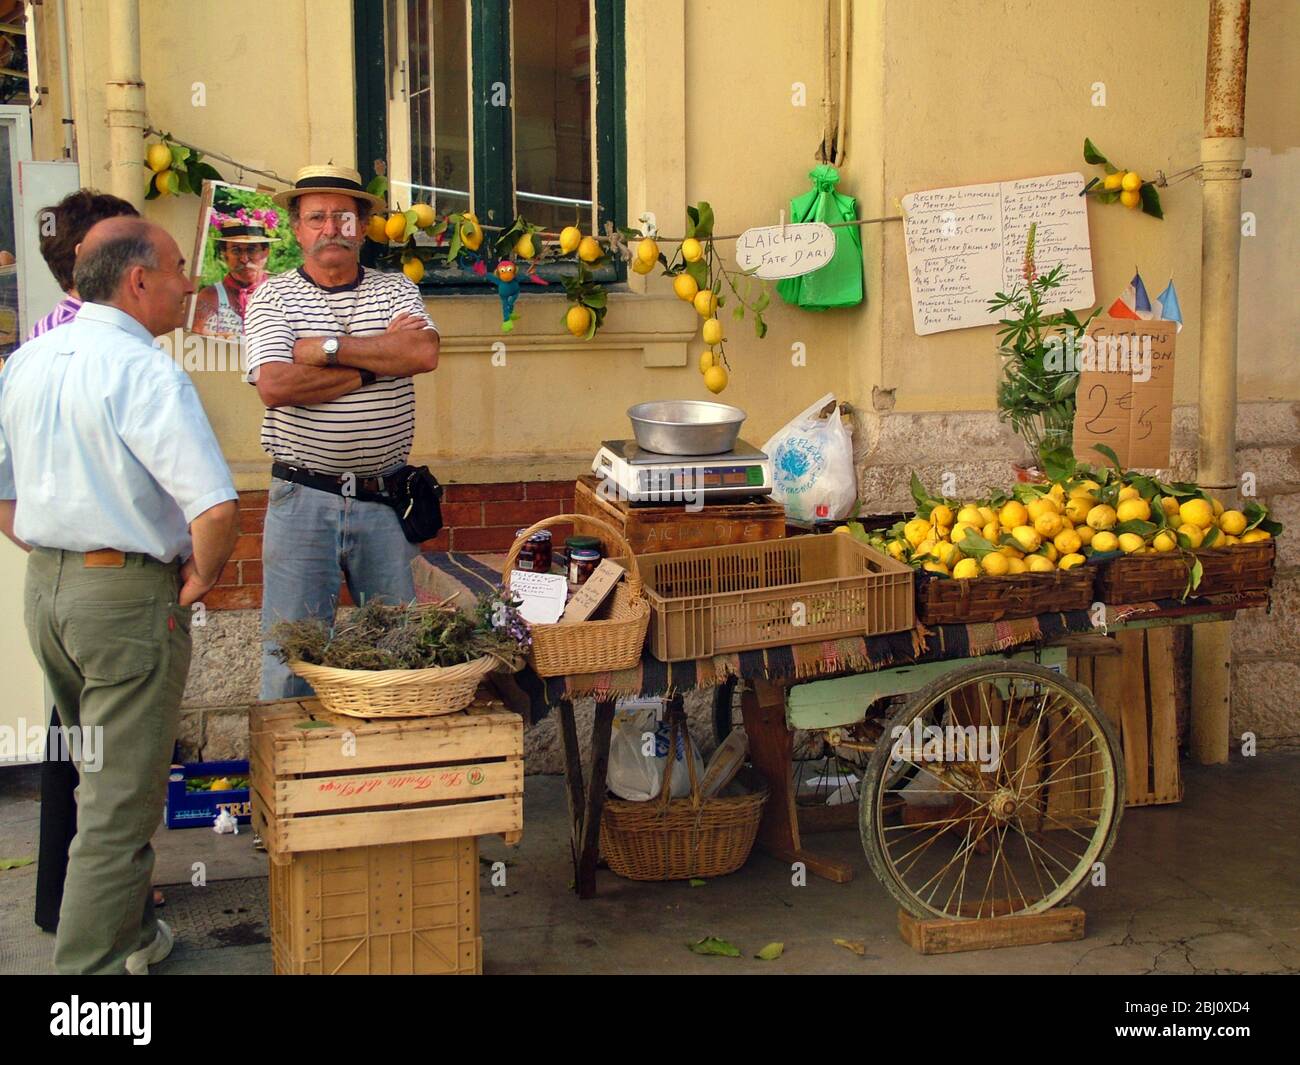 Colourful market trader selling lavender and lemons, in Menton, south of France - Stock Photo